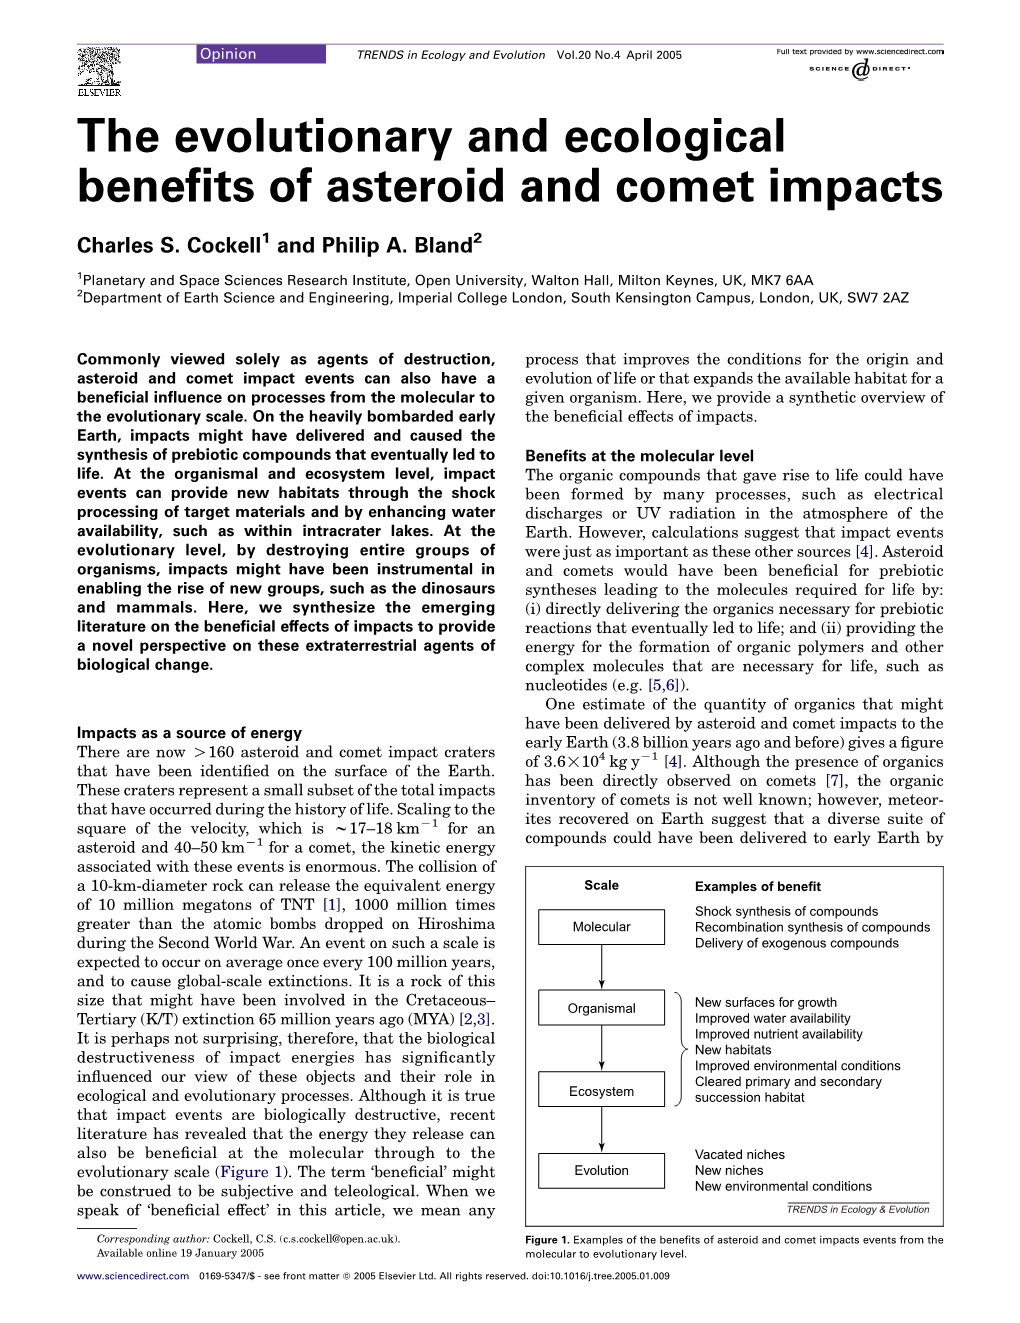 The Evolutionary and Ecological Benefits of Asteroid and Comet